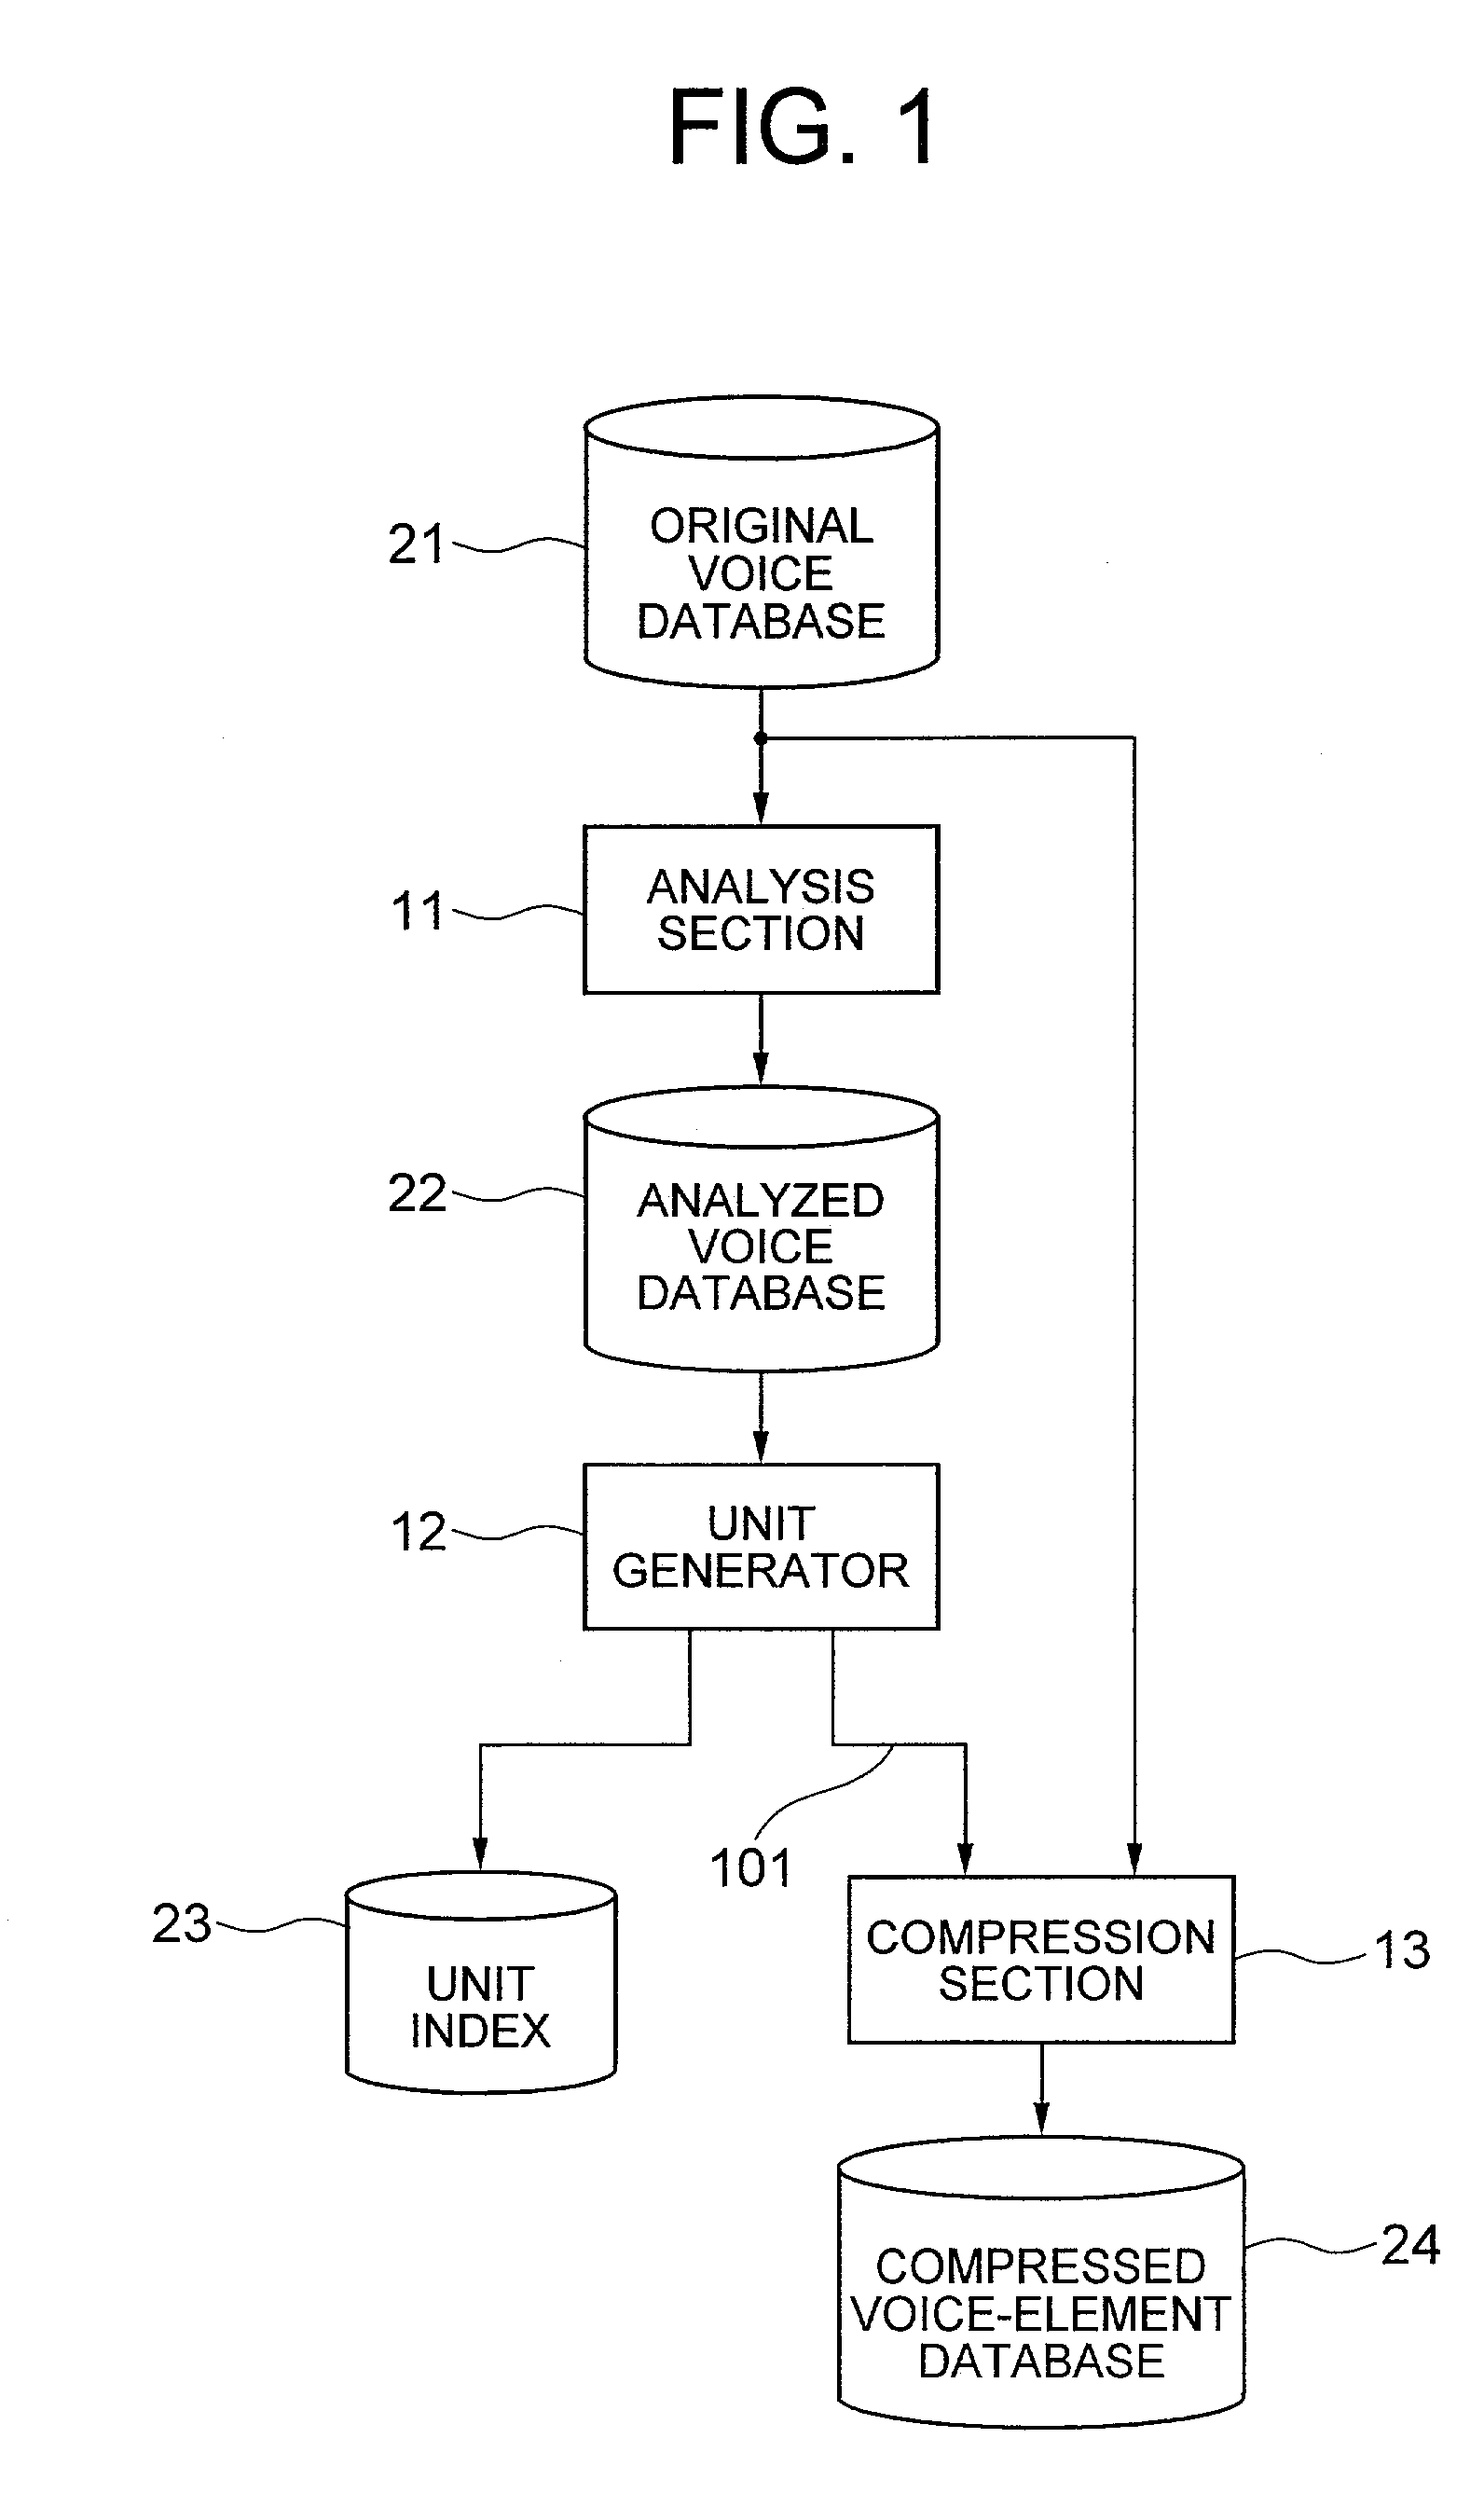 Method for synthesizing a voice waveform which includes compressing voice-element data in a fixed length scheme and expanding compressed voice-element data of voice data sections